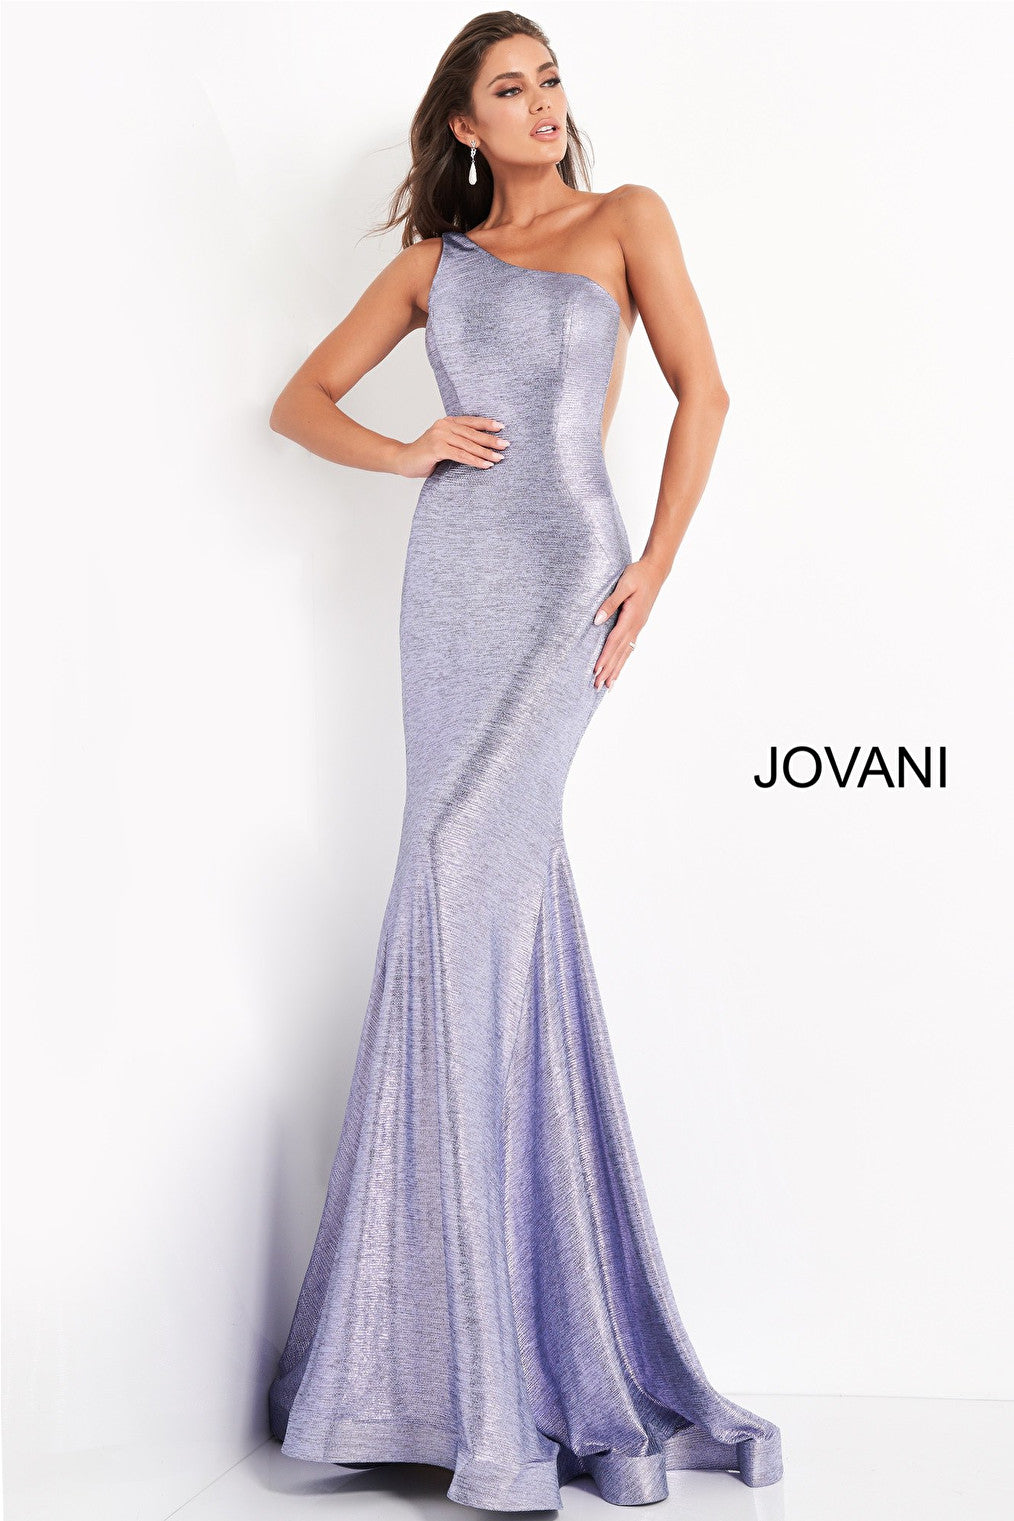 Long Jovani gown with train 06367